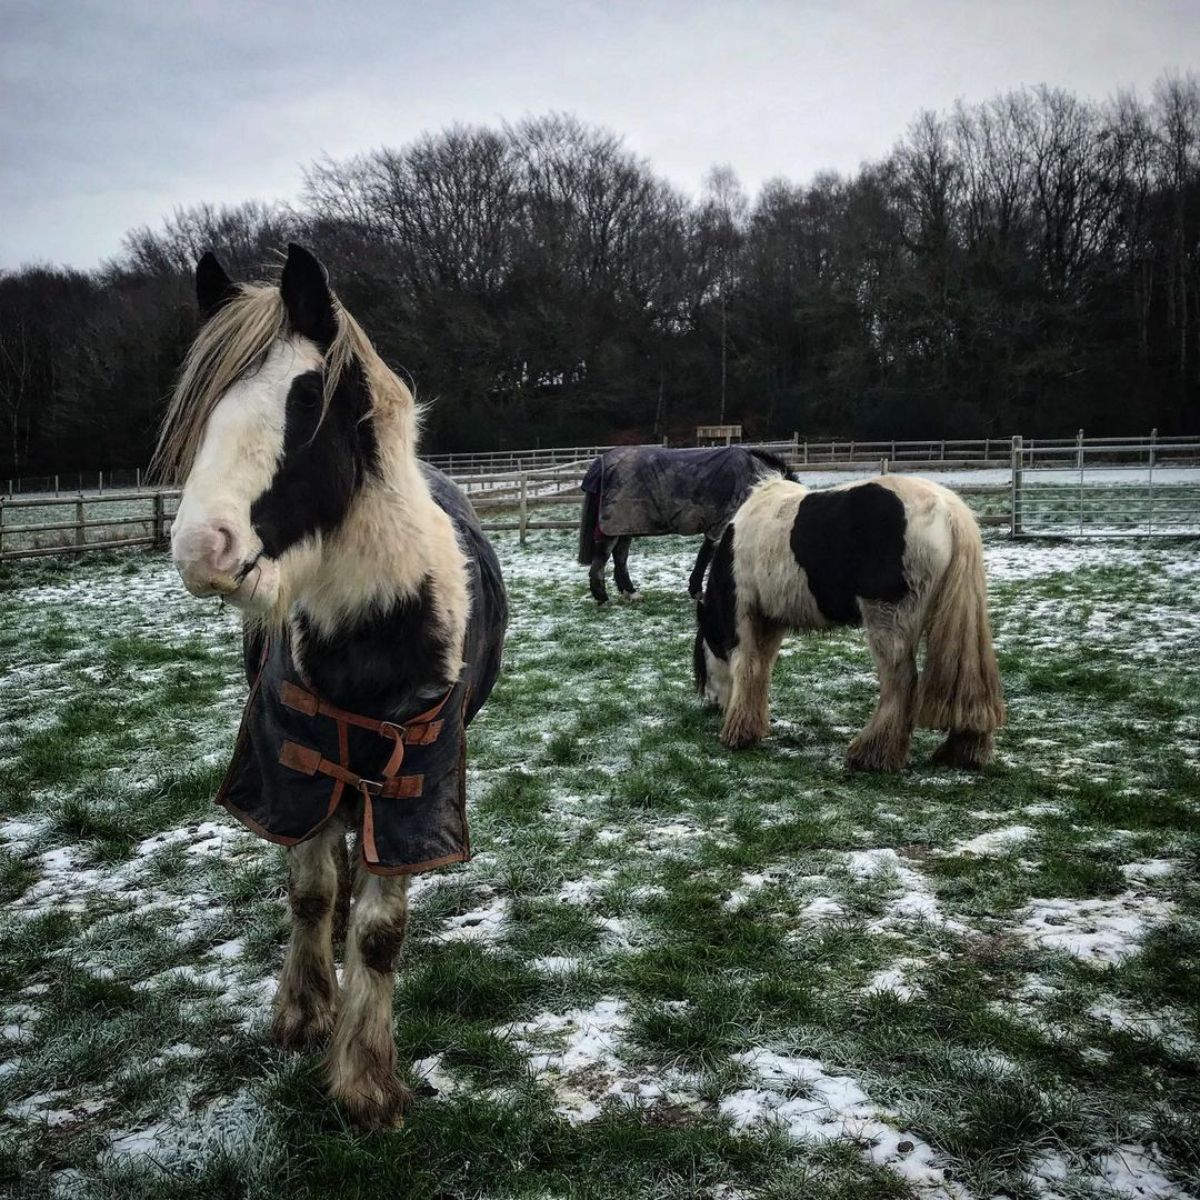 Three fluffy horses grazing and standing on a frosted ranch.